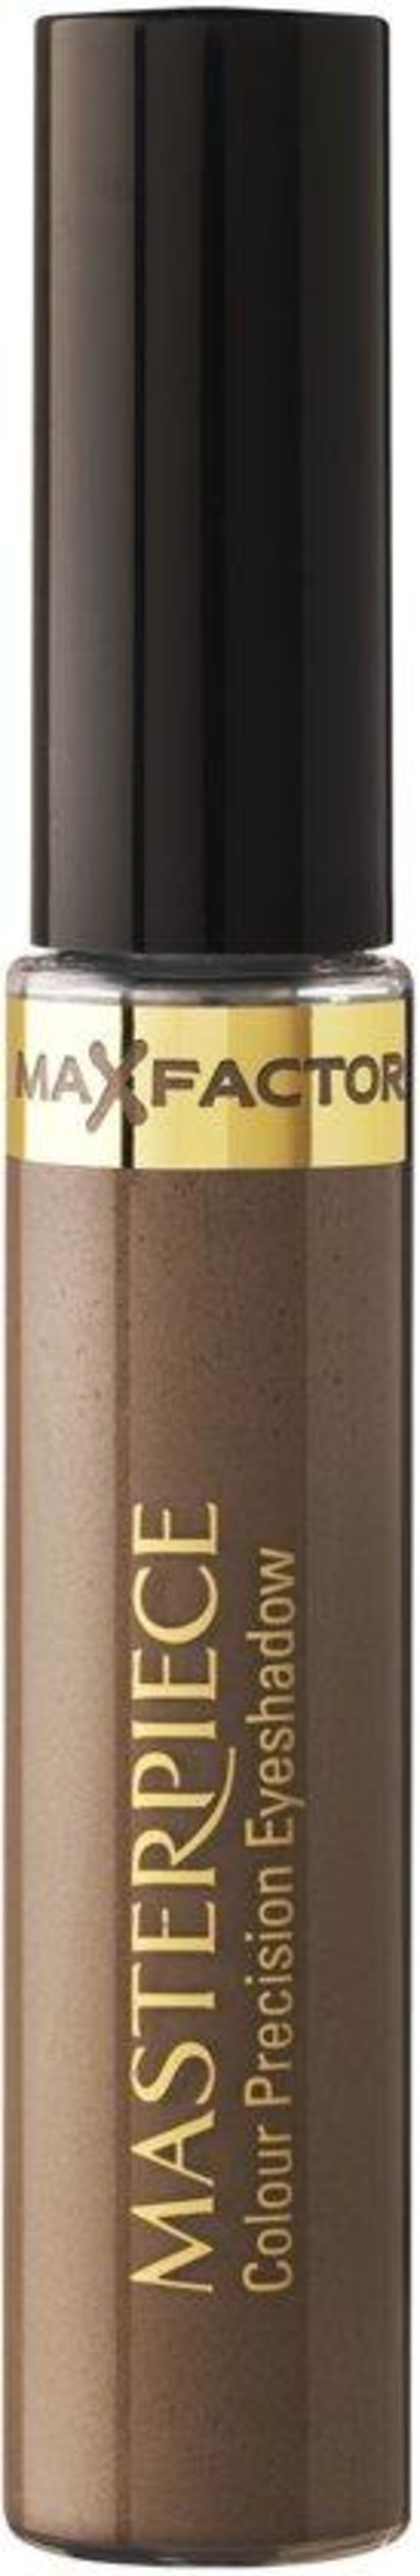 toeter Bad Europa Max Factor Masterpiece Colour Precision Oogschaduw - 003 Coffee | Max Factor  - We Are Eves: honest cosmetic reviews.